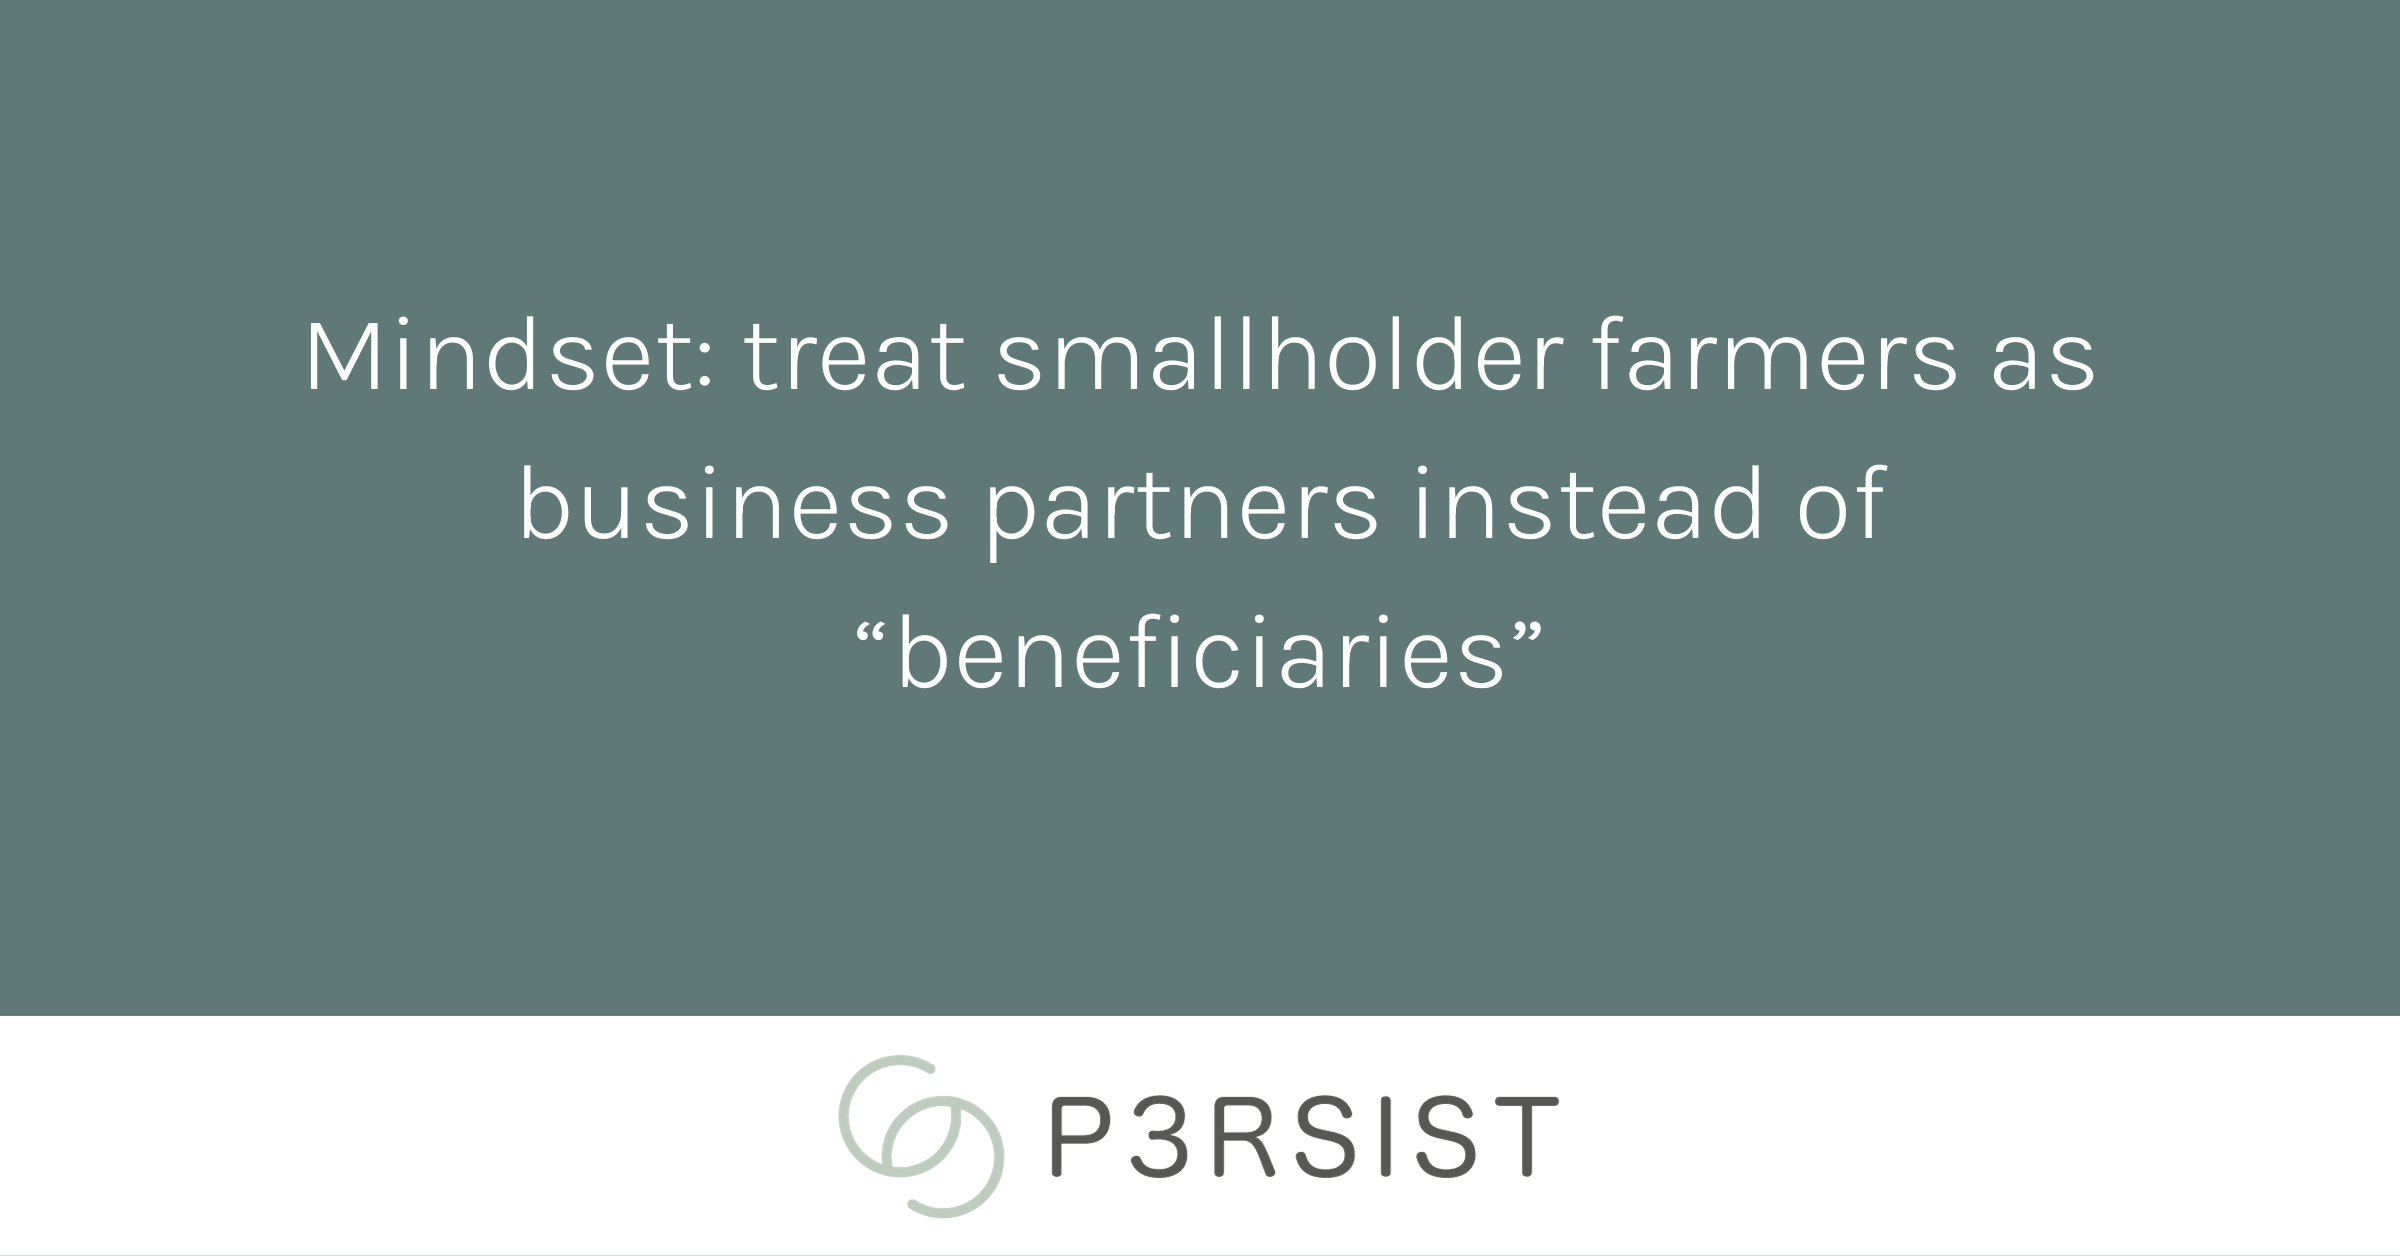 Quote saying: Mindset: treat smallholder farmers as business partners instead of "beneficiaries"